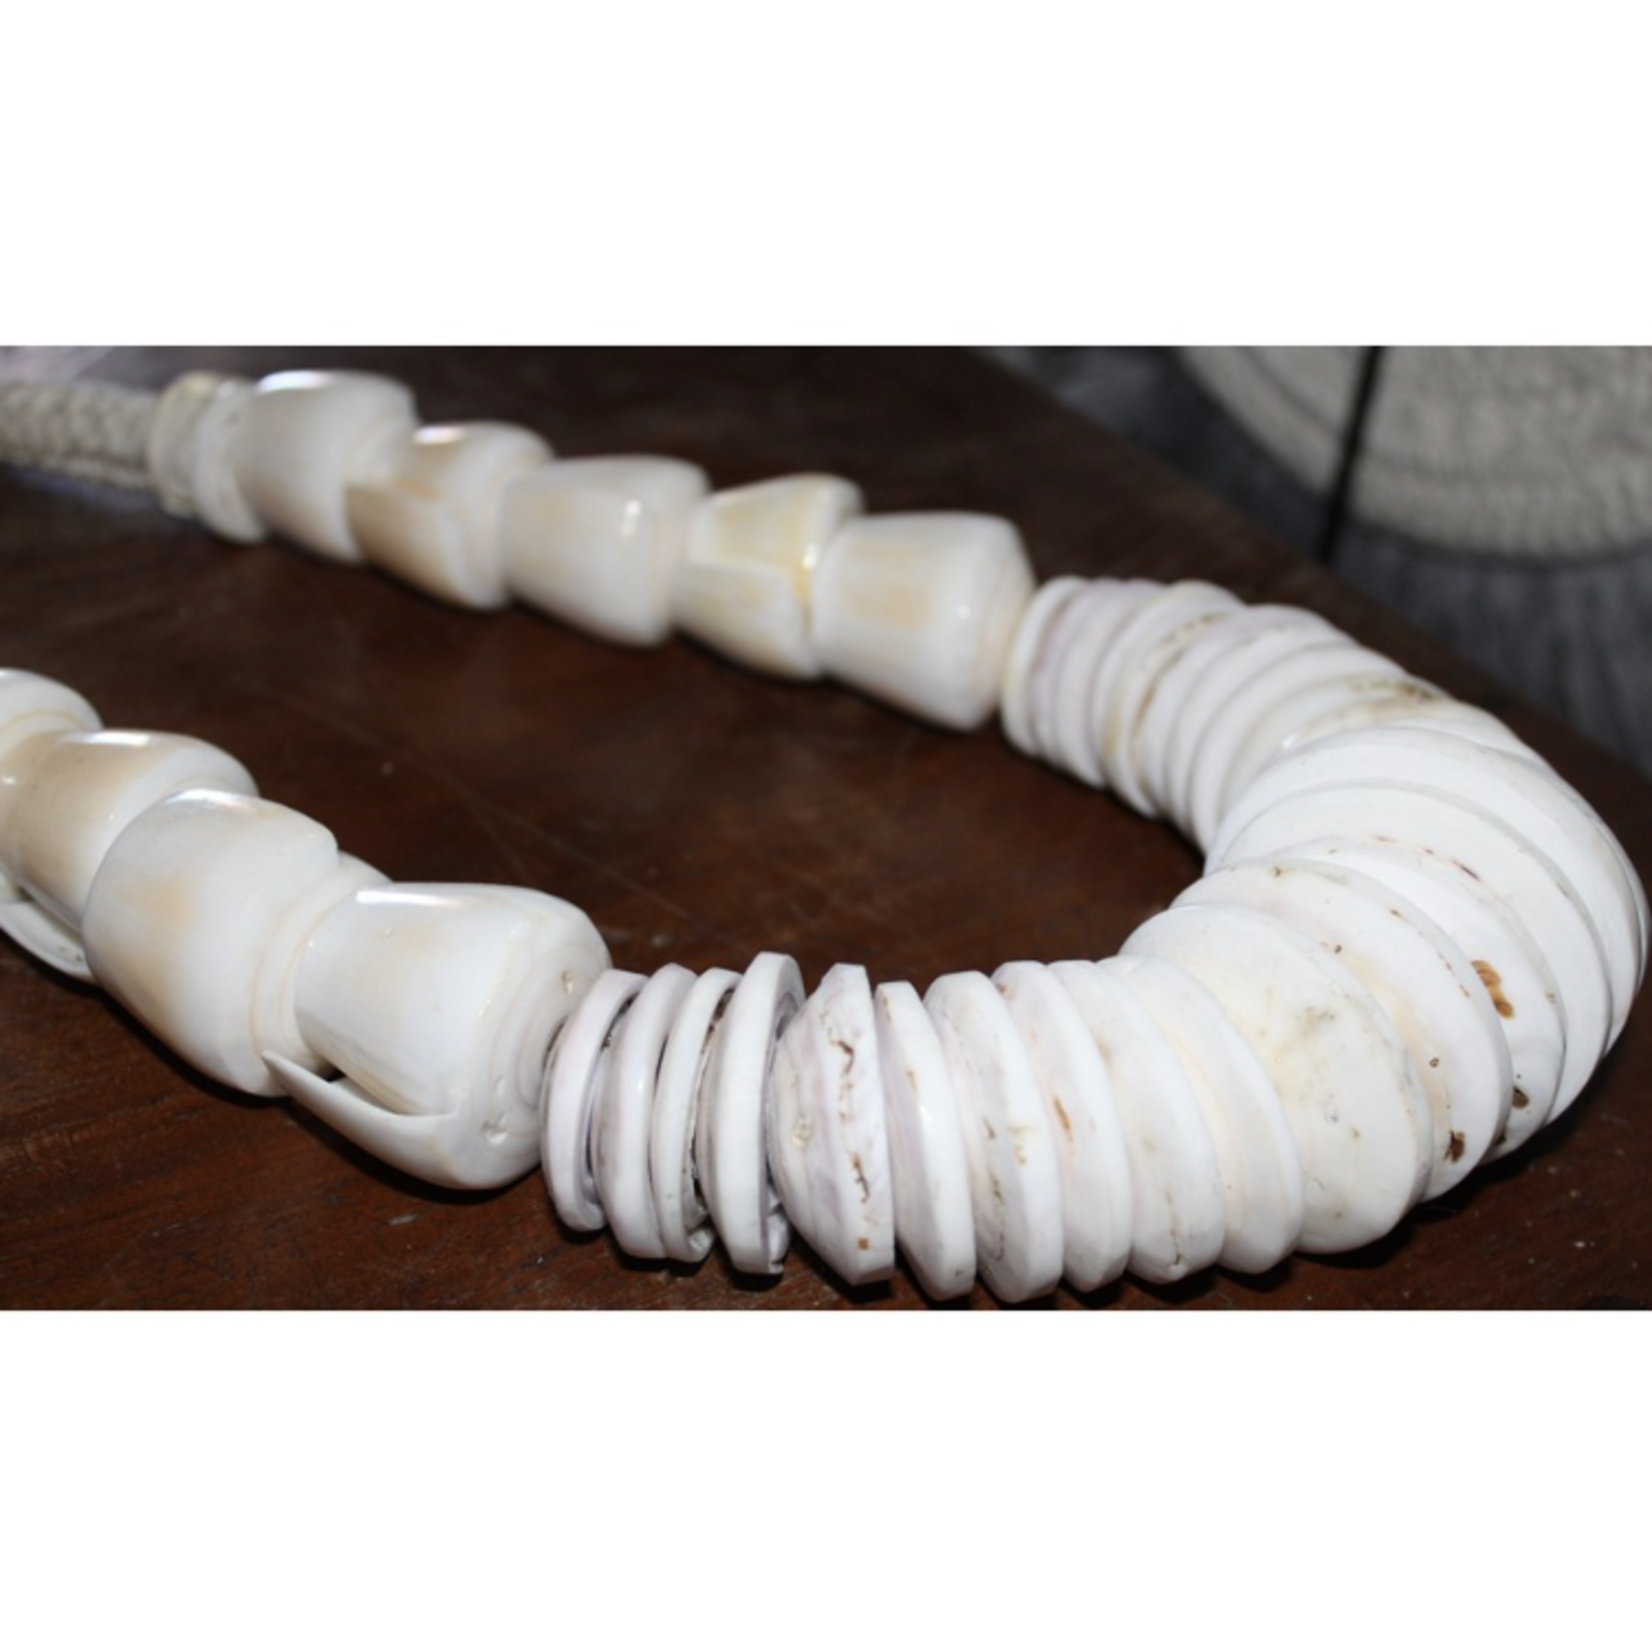 Outside The Box 19" Handcrafted Natural White Shells Necklace